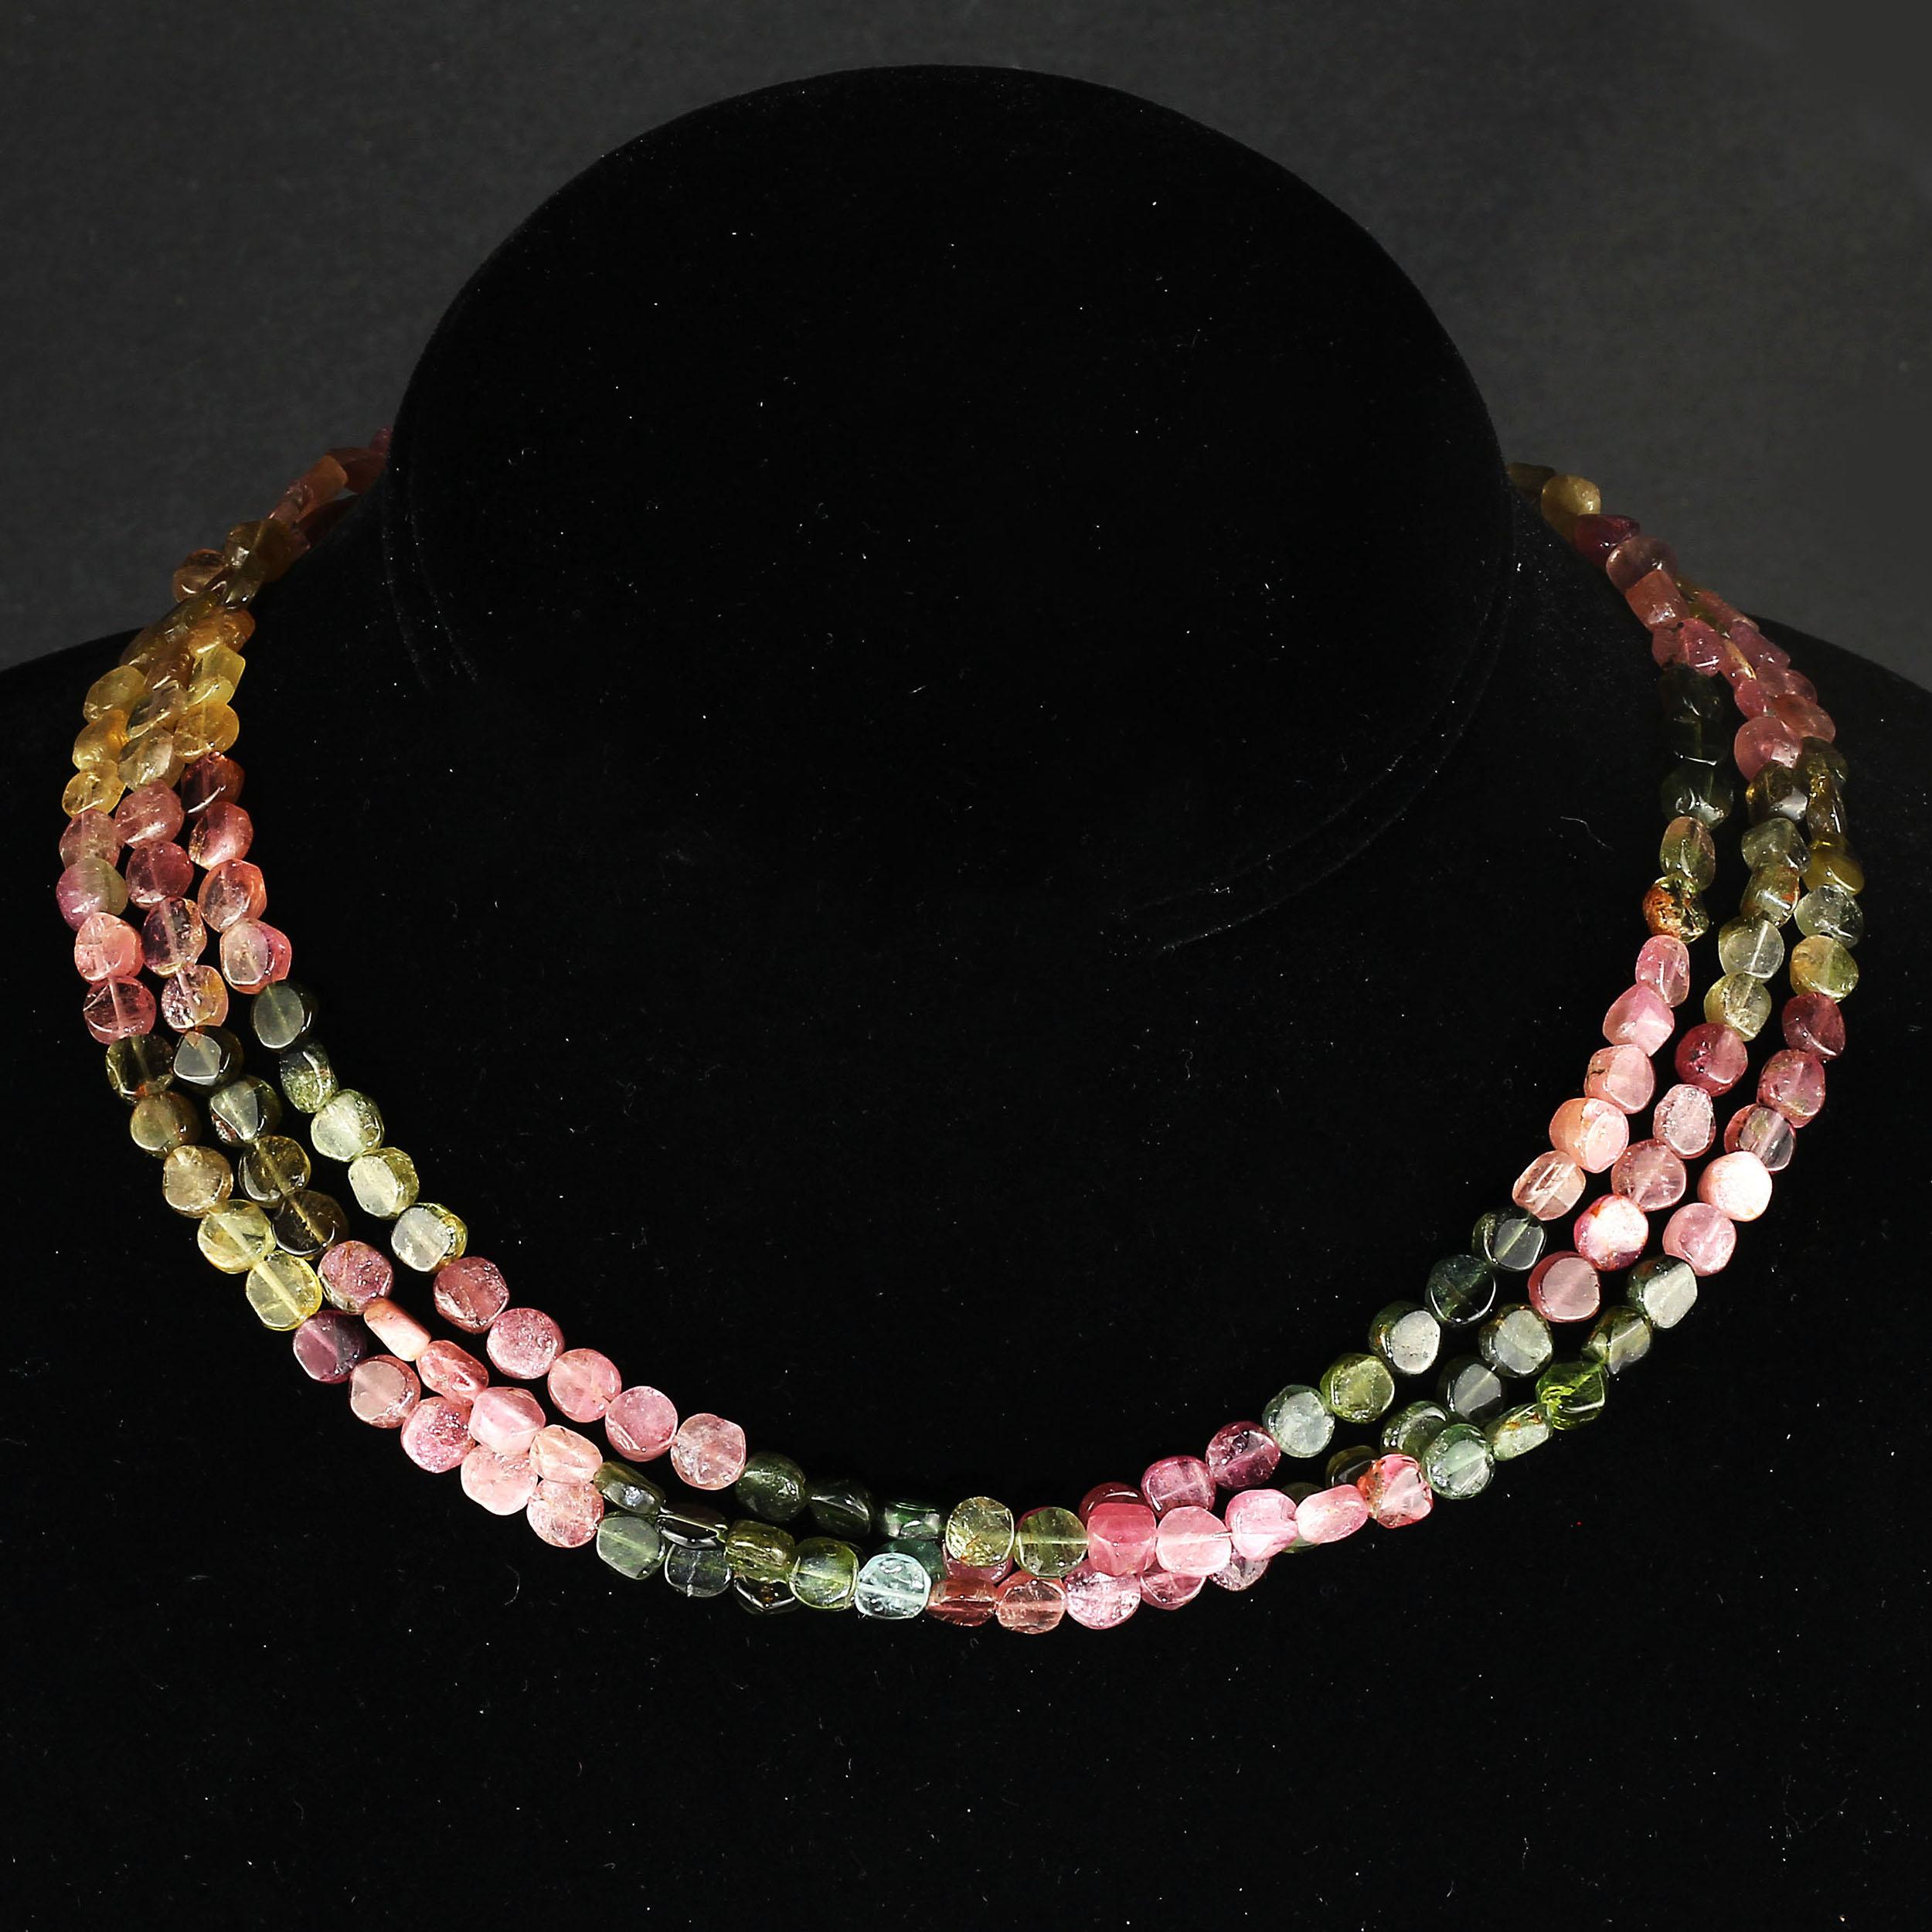 Bead Gemjunky Multi-Color Tourmaline Choker Necklace in Three Strands